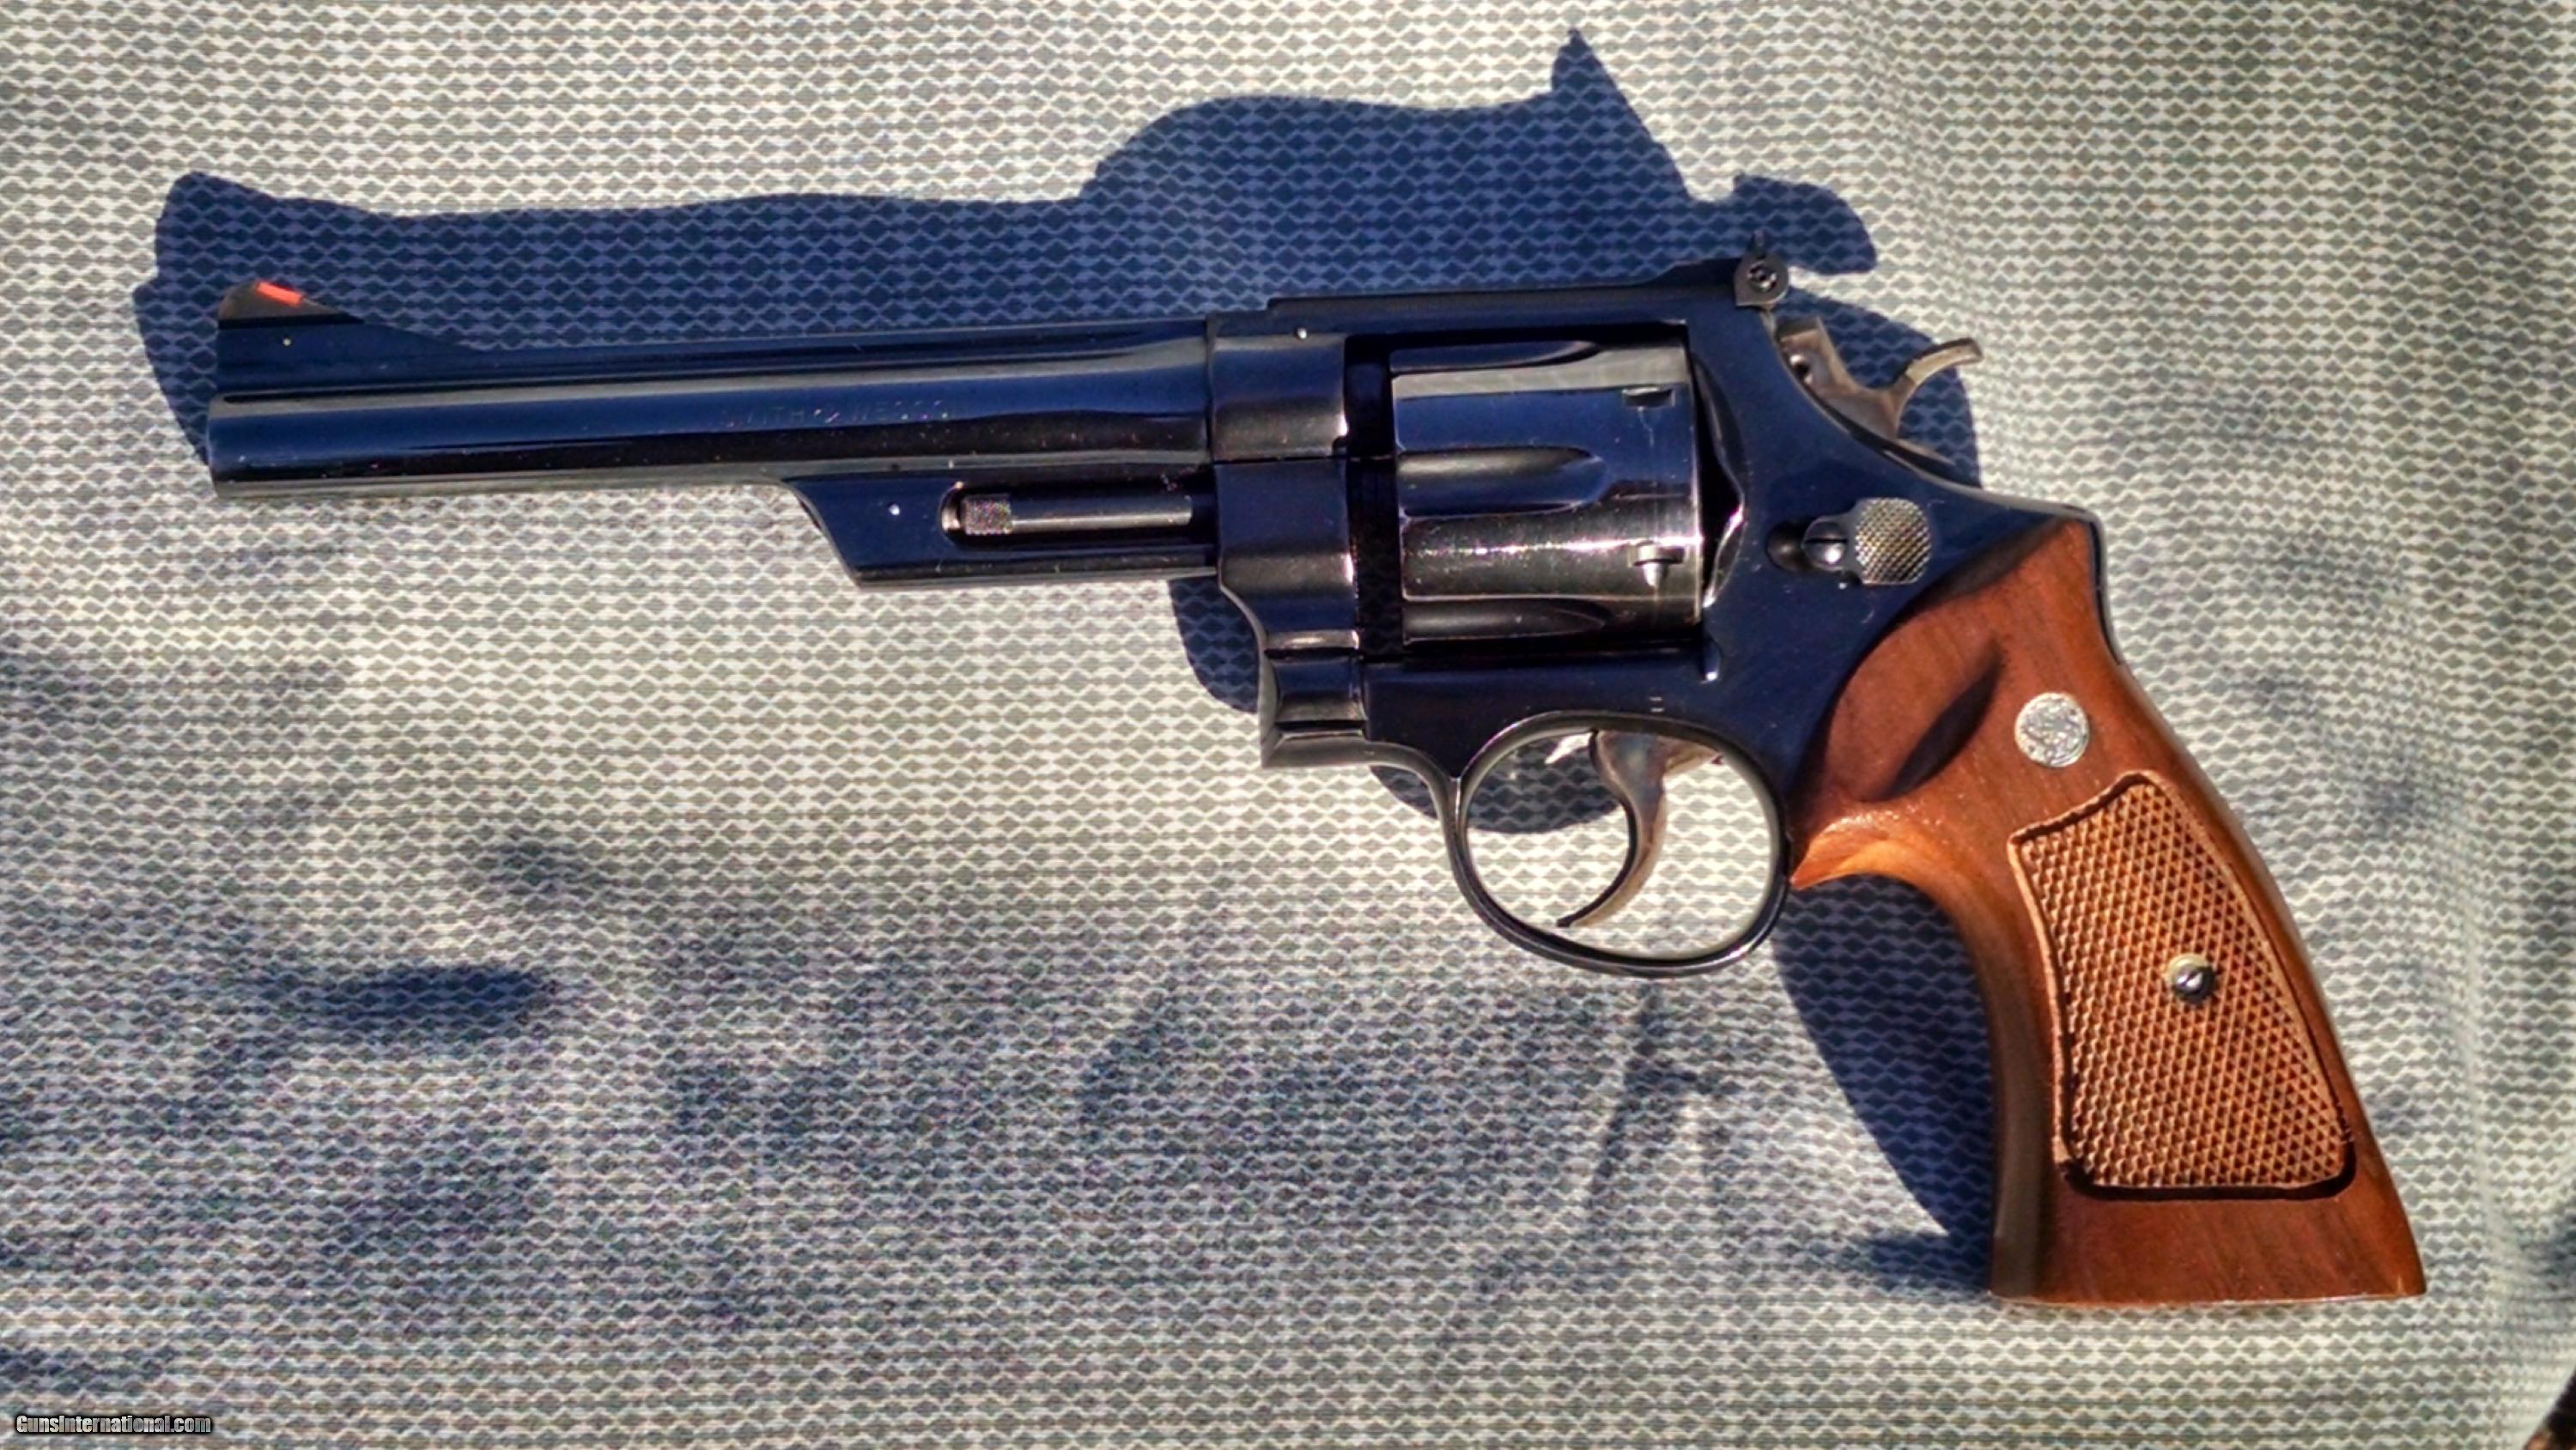 Smith & Wesson 357 Magnum Revolver Backgrounds on Wallpapers Vista. 